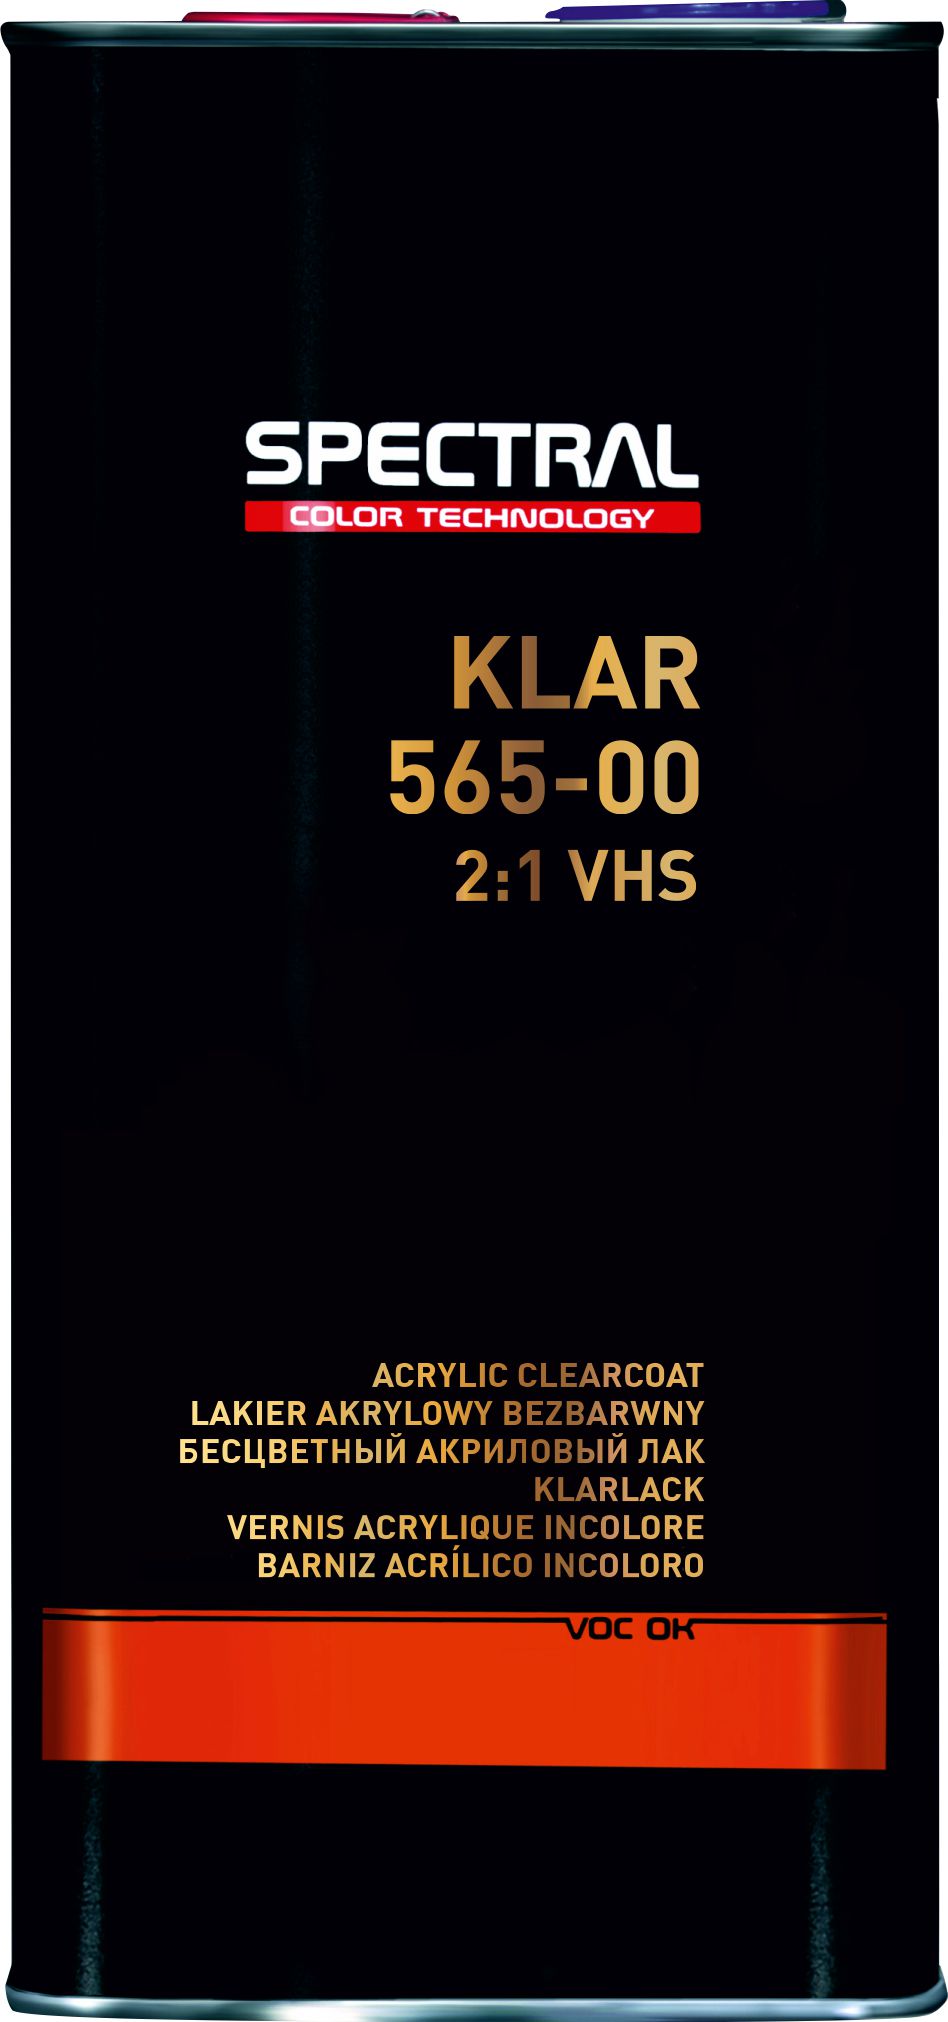 KLAR 565–00 - Two-component VHS clearcoat